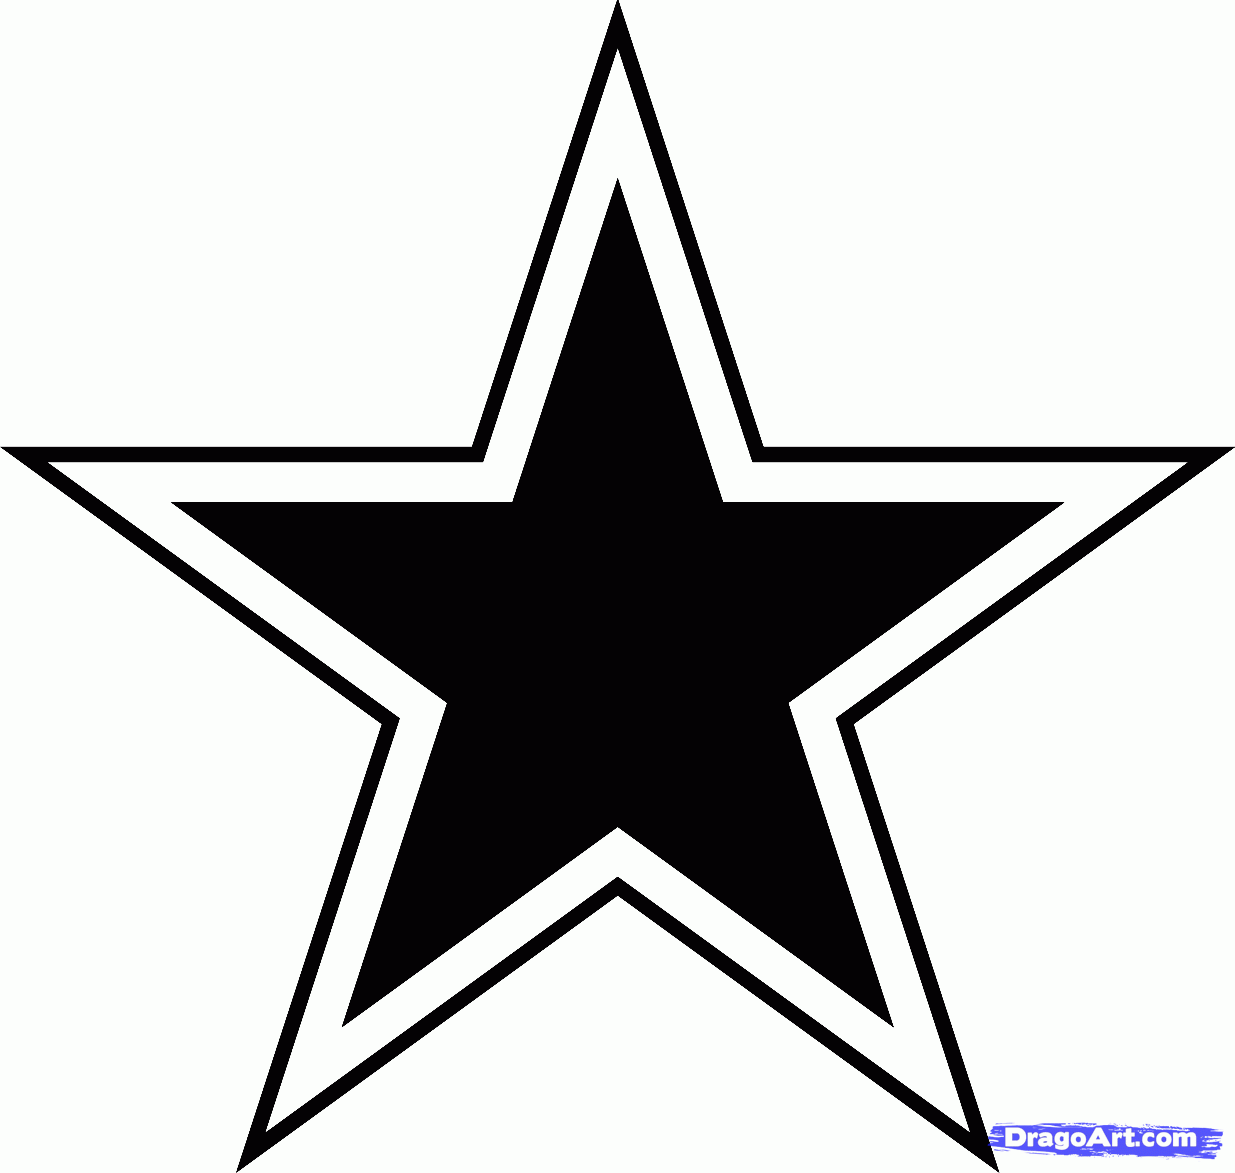 Dallas Cowboys Logo Coloring Page - High Quality Coloring Pages